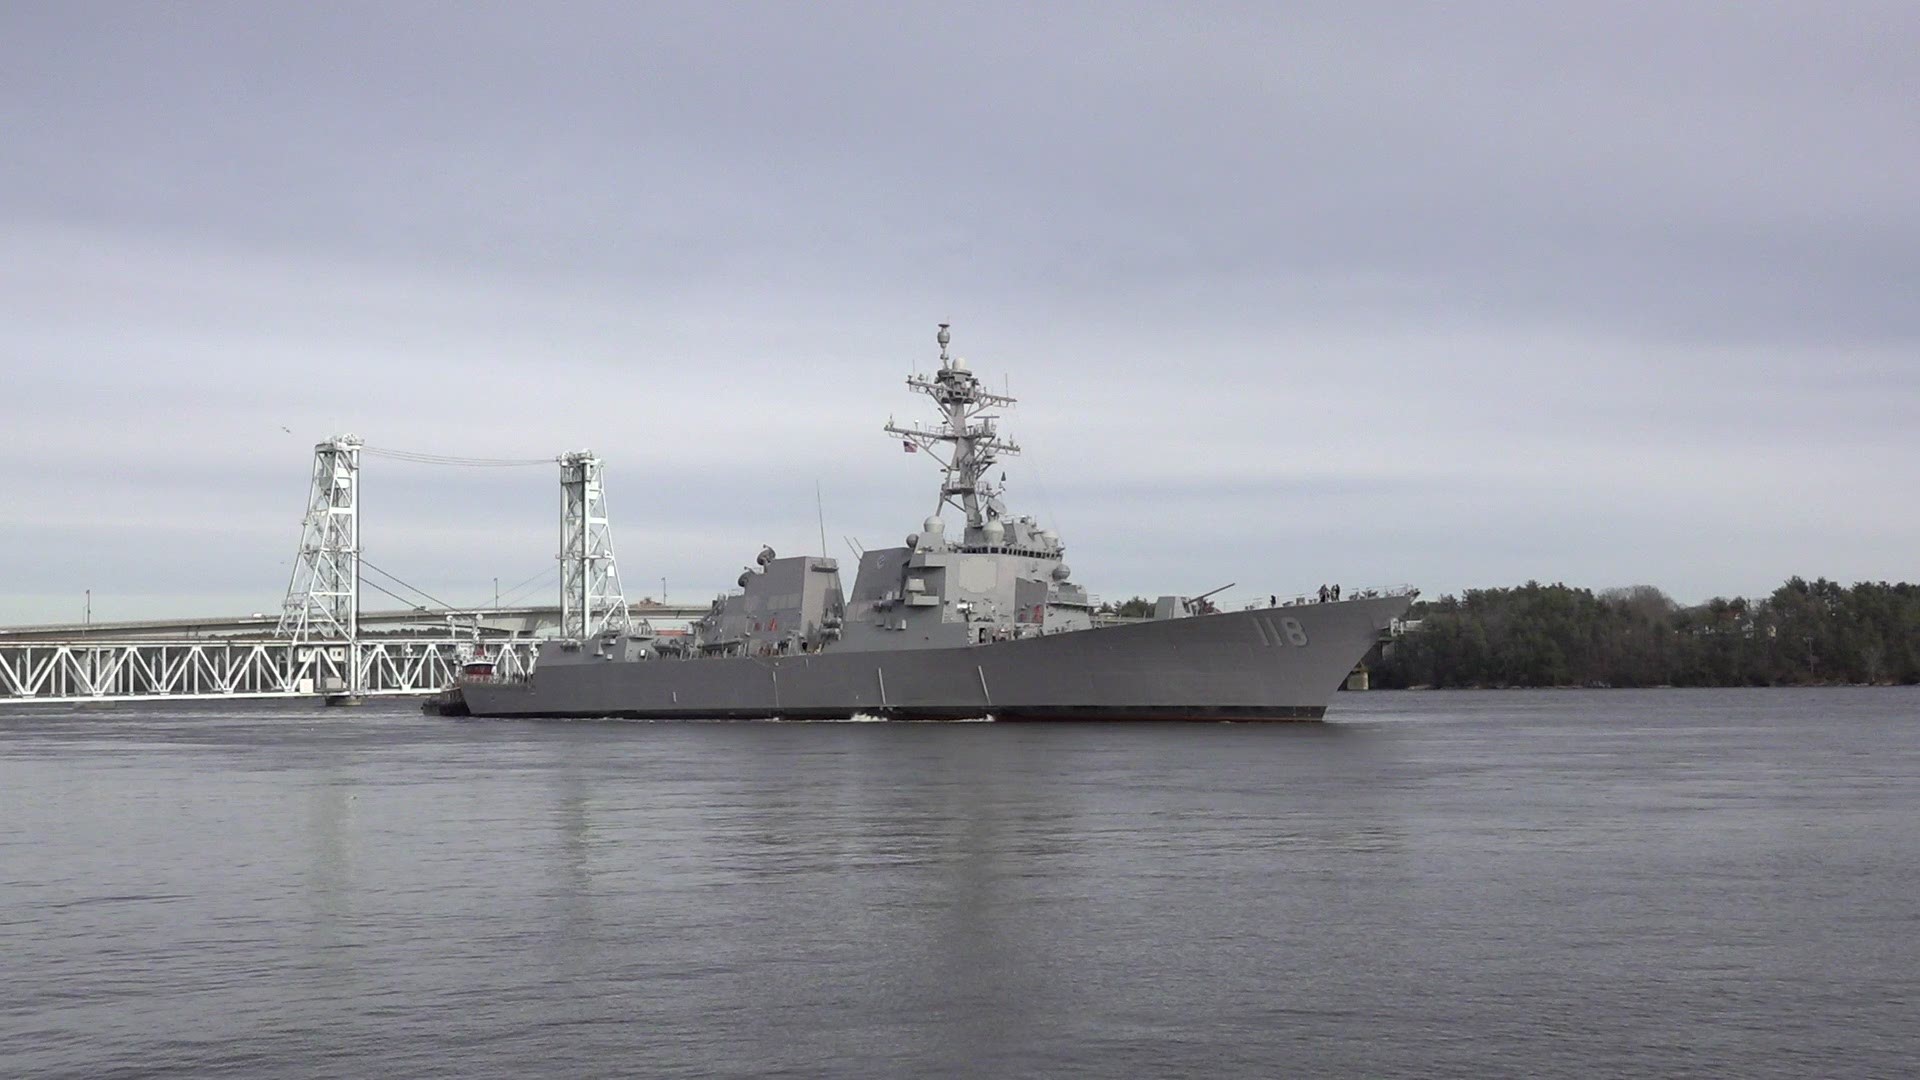 Latest Arleigh Burke-class destroyer sails from Bath Iron Works for sea trials